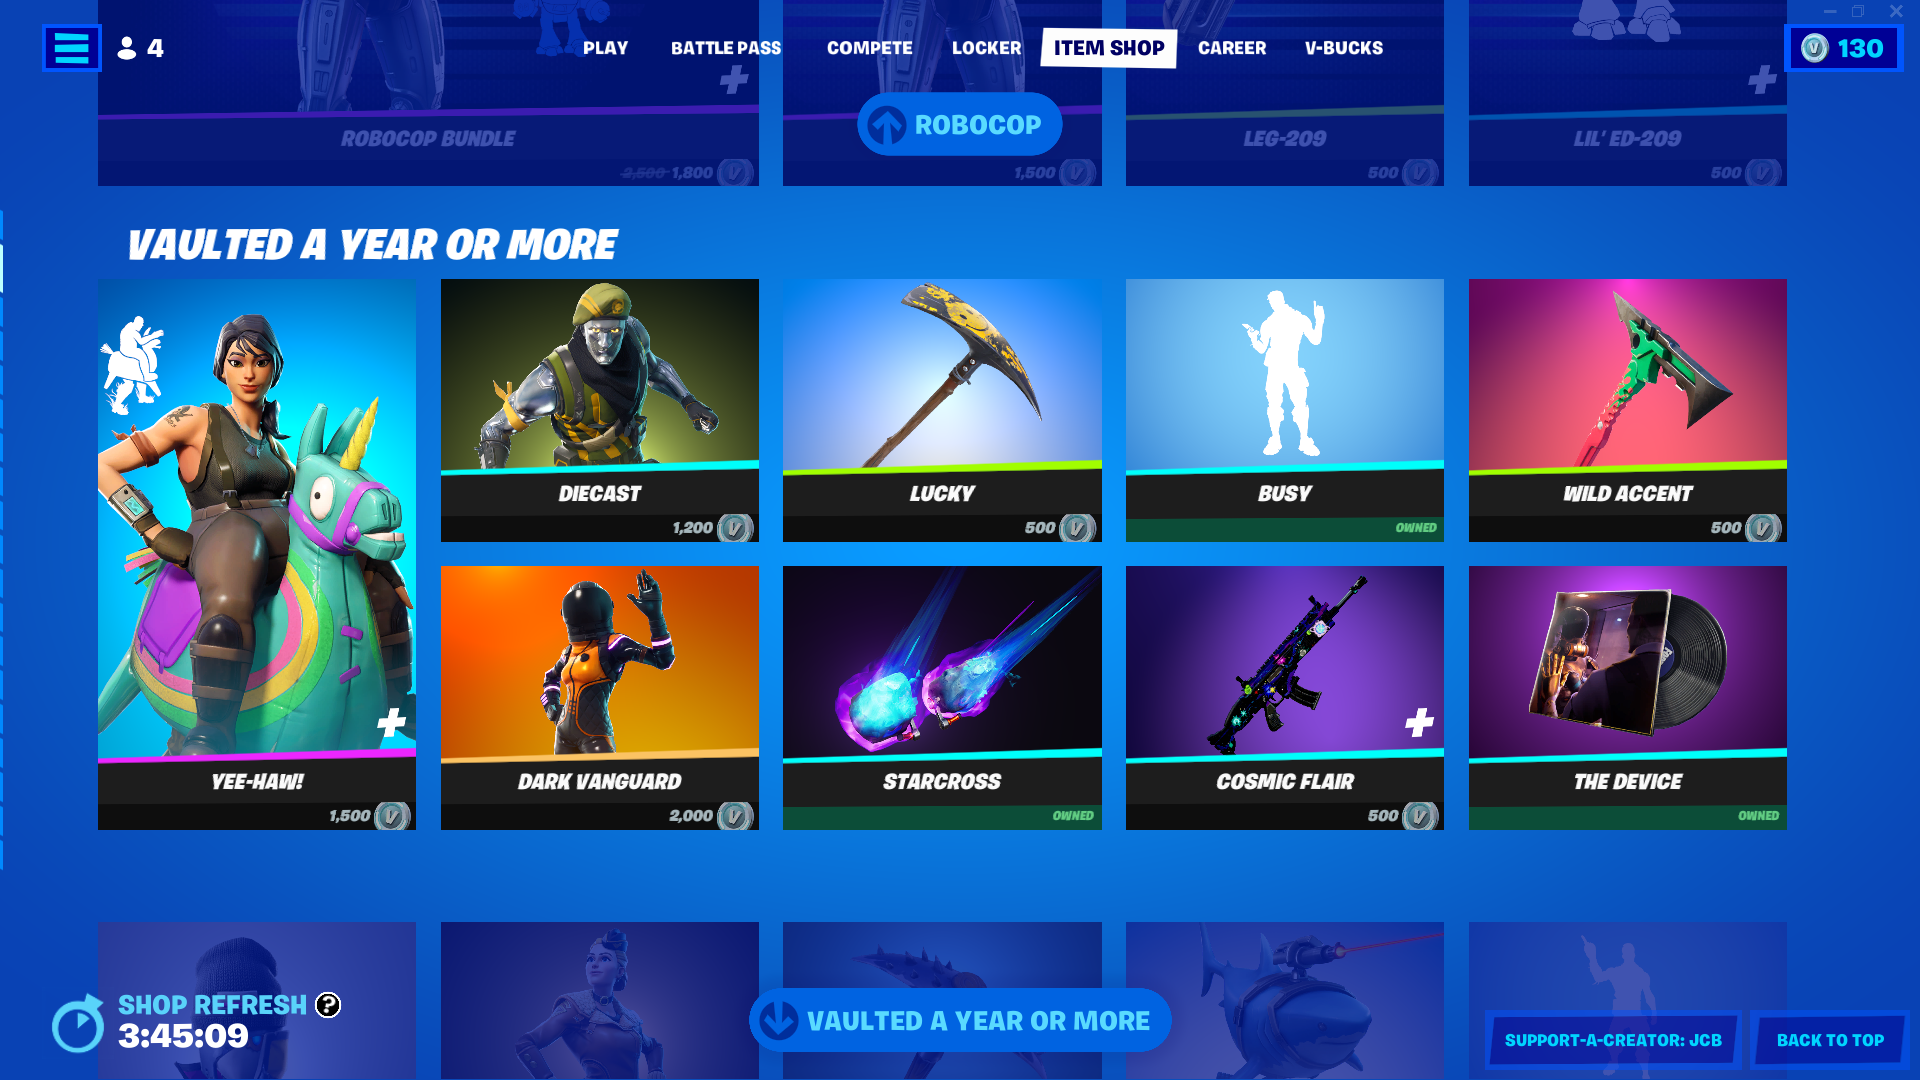 Vaulted cosmetics return to the Fortnite Item Shop